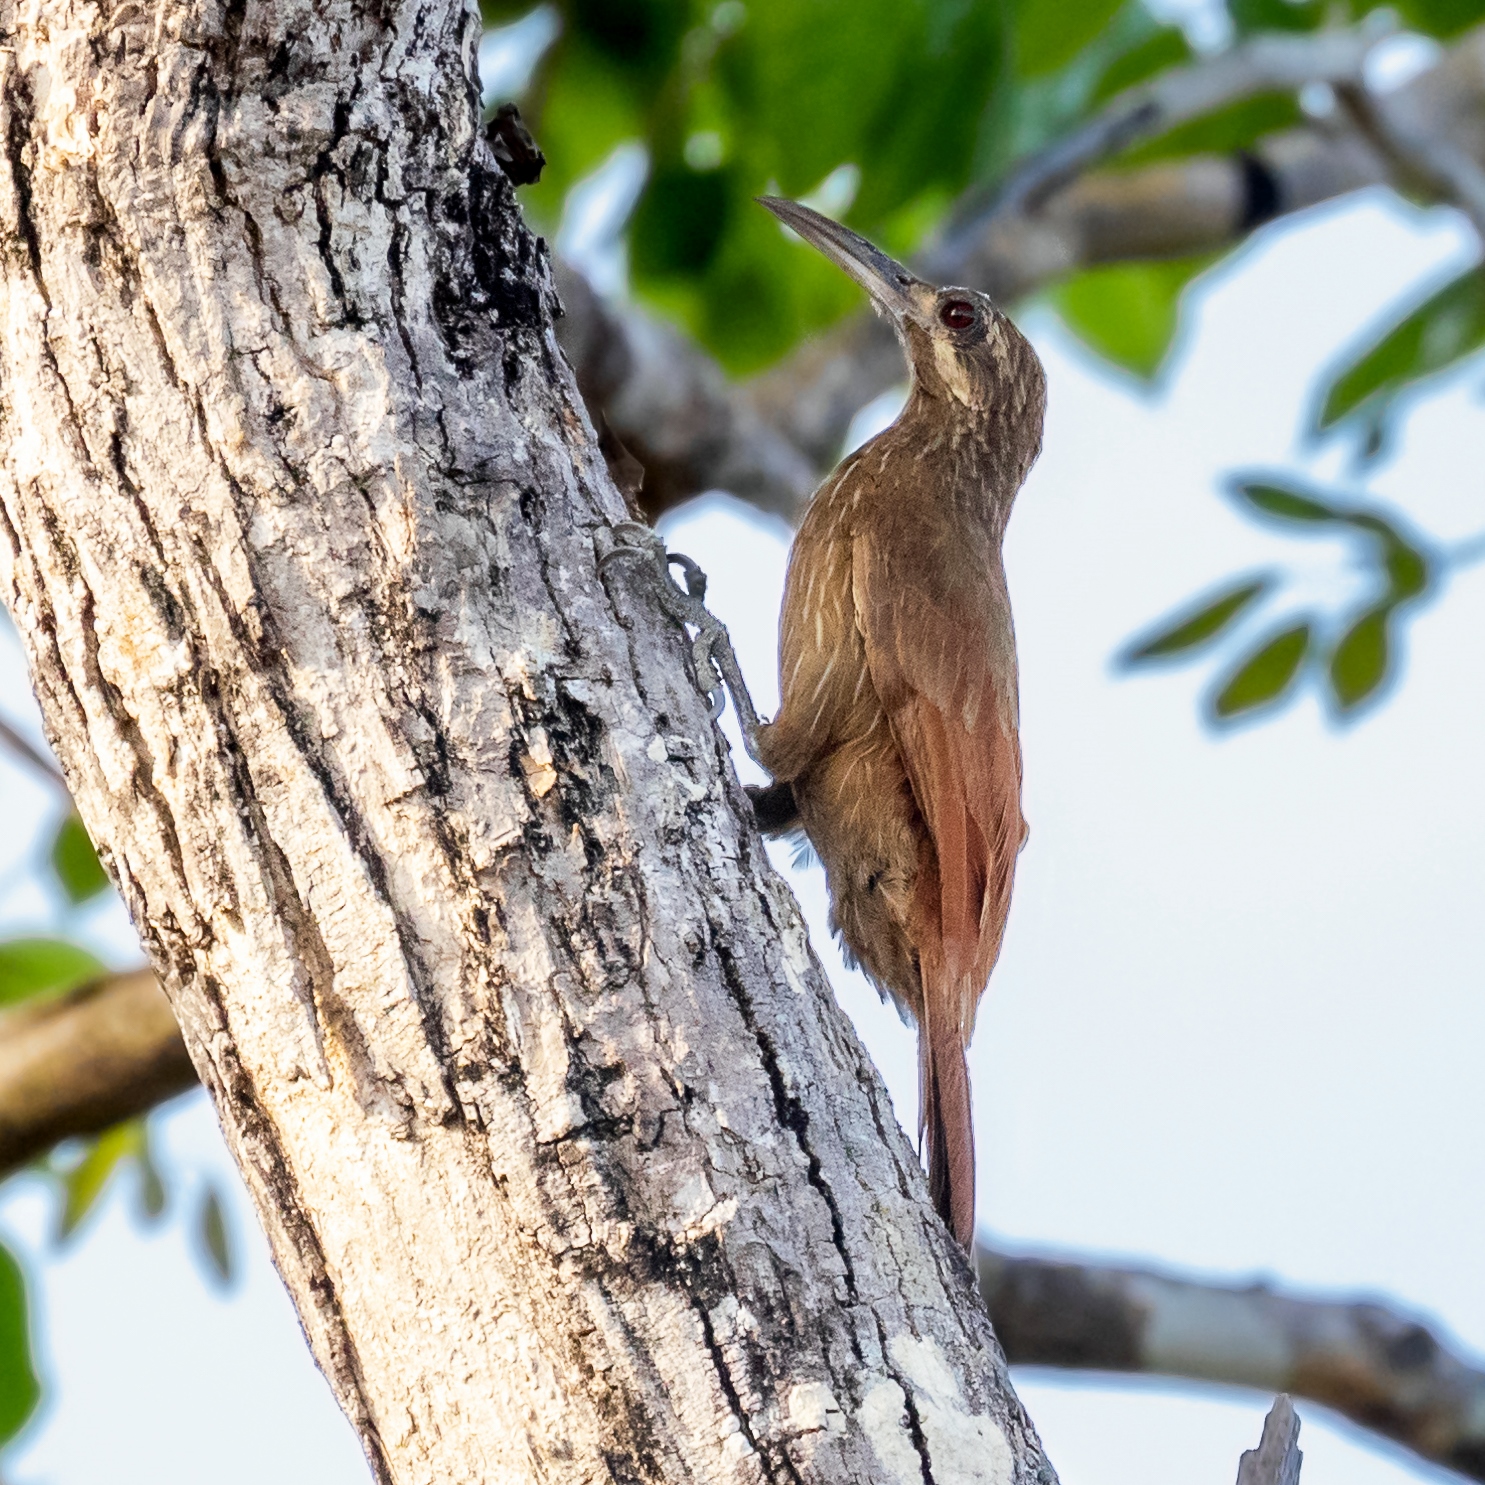 Moustached woodcreeper (Xiphocolaptes falcirostris). Image credit: CC by SA 4.0 | Hector Bottai.